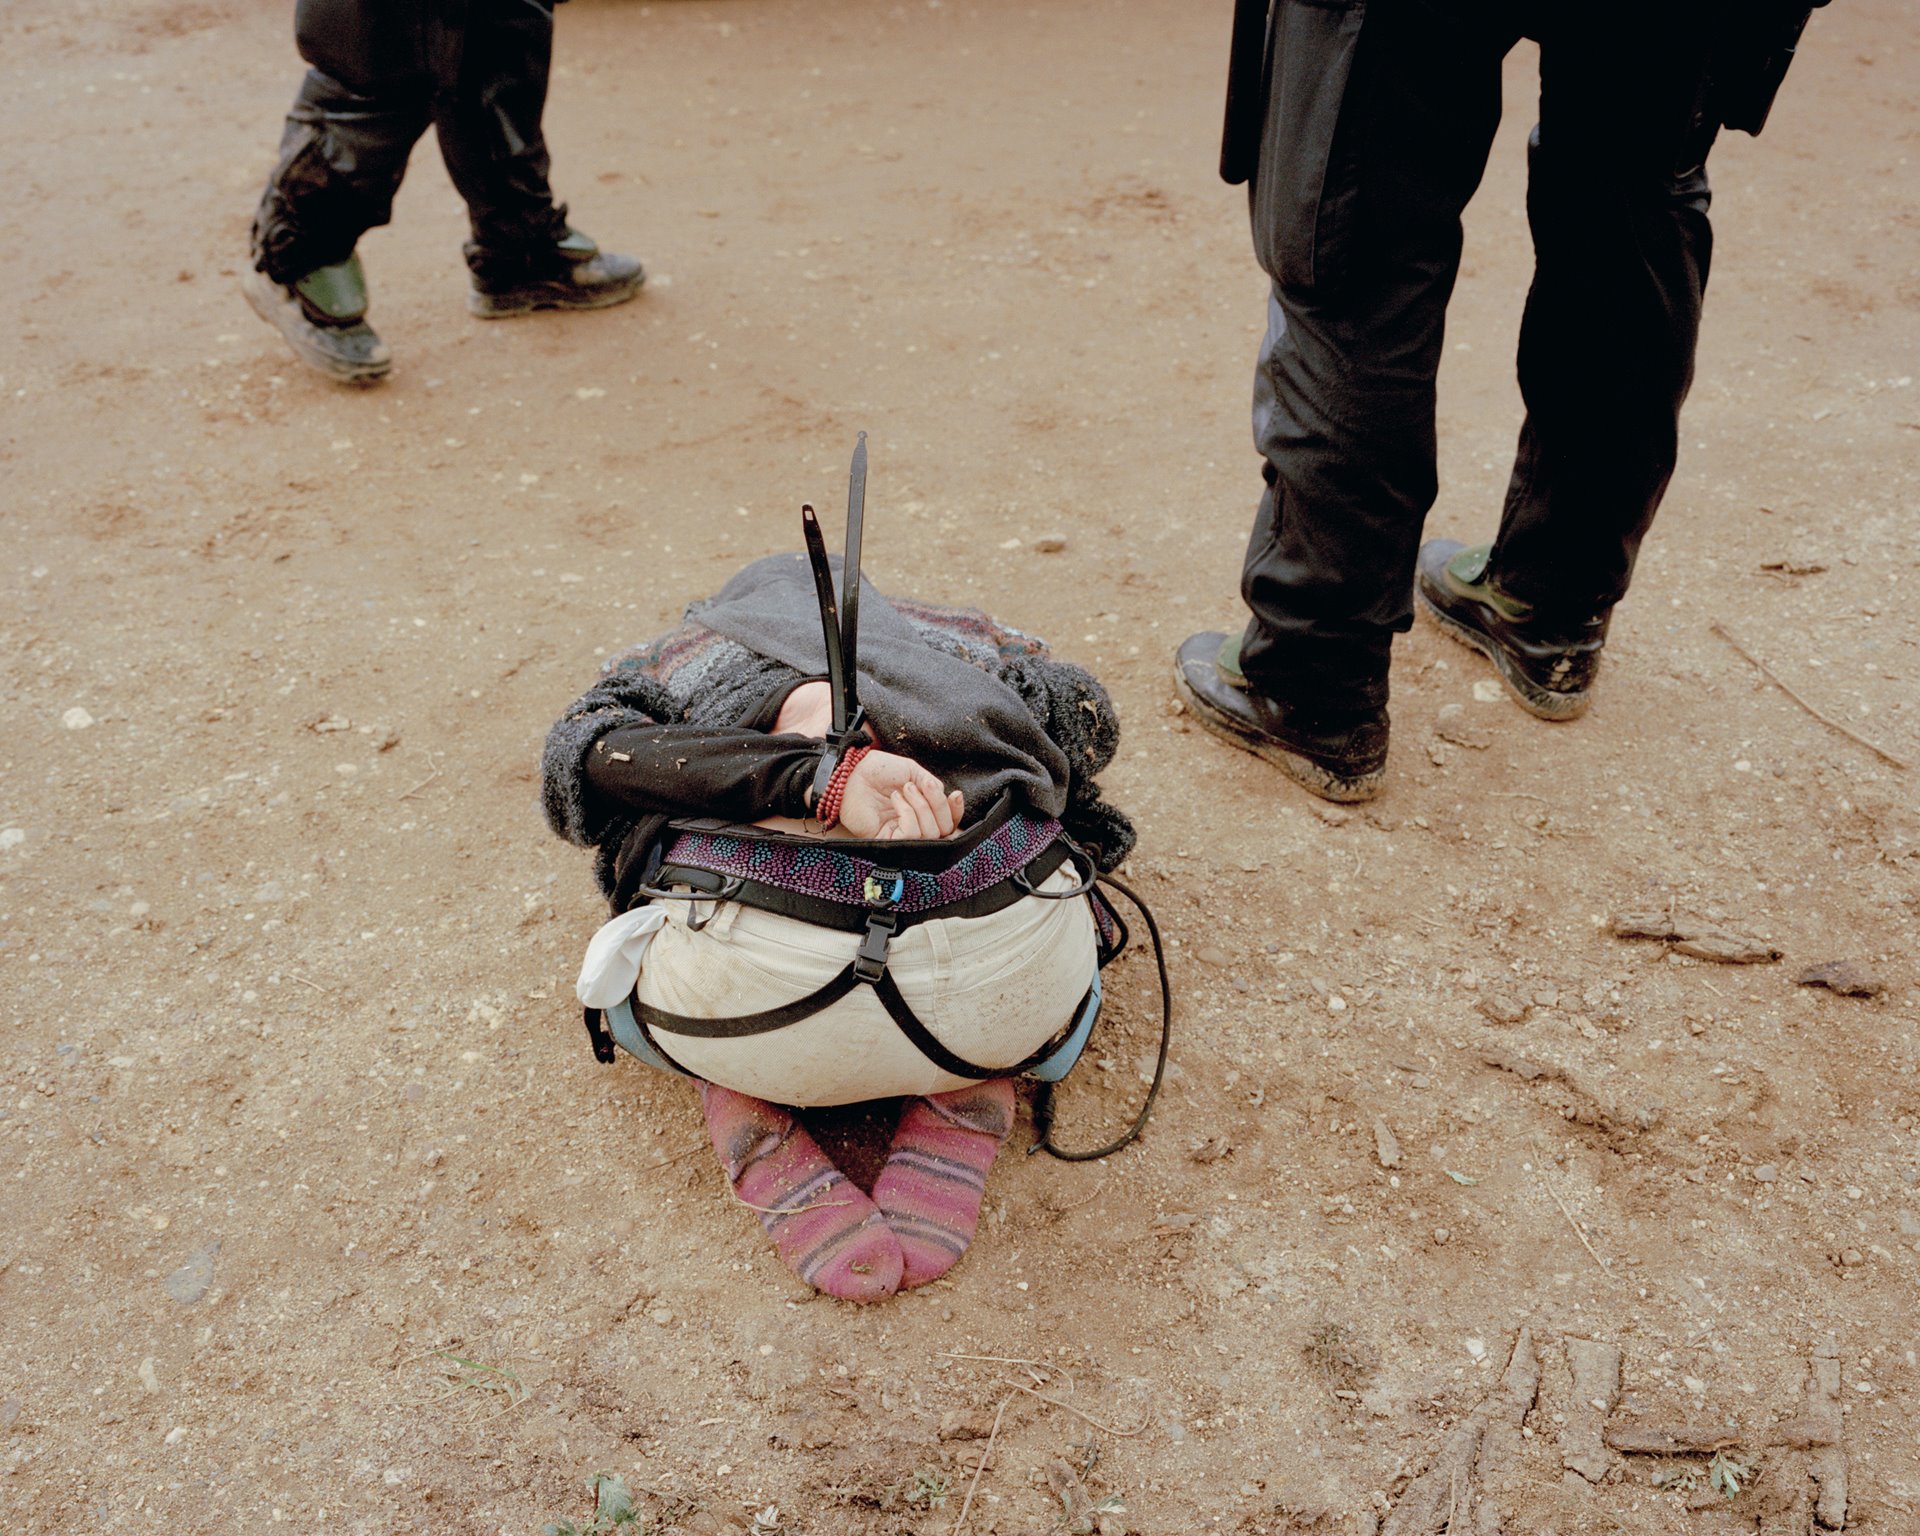 An activist kneels on the ground after her arrest during the eviction of treehouses in Hambach Forest, near Kerpen, Germany. Activists had occupied a section of the forest since 2012, building tree-houses to prevent trees being cut down. The police operation to evict them dragged on for weeks, and cost &nbsp;EUR 50 million.&nbsp;